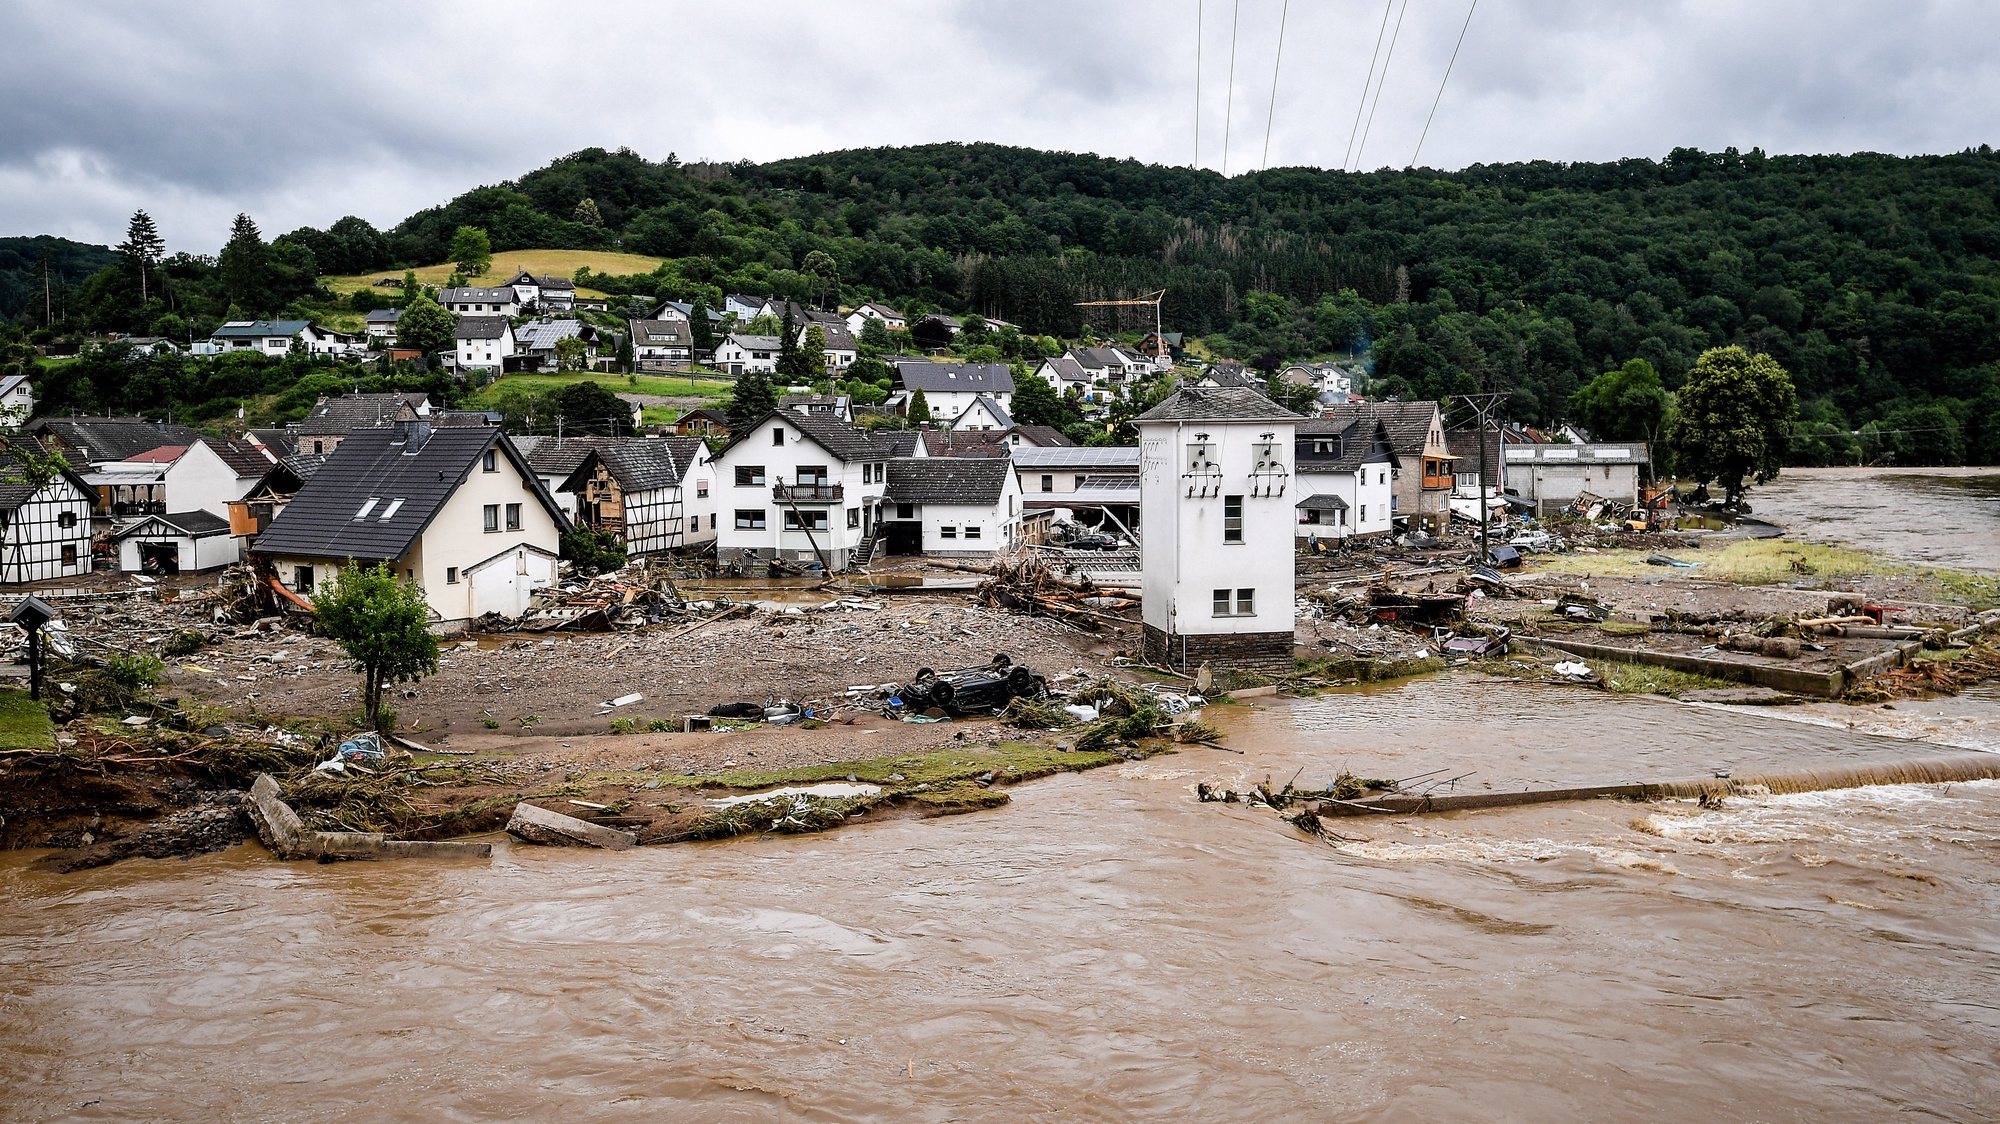 epa09345975 The village of Schuld in the district of Ahrweiler is destroyed after heavy flooding of the river Ahr, in Schuld, Germany, 15 July 2021. Large parts of Western Germany were hit by heavy, continuous rain in the night to Wednesday, resulting in local flash floods that destroyed buildings and swept away cars.  EPA/SASCHA STEINBACH